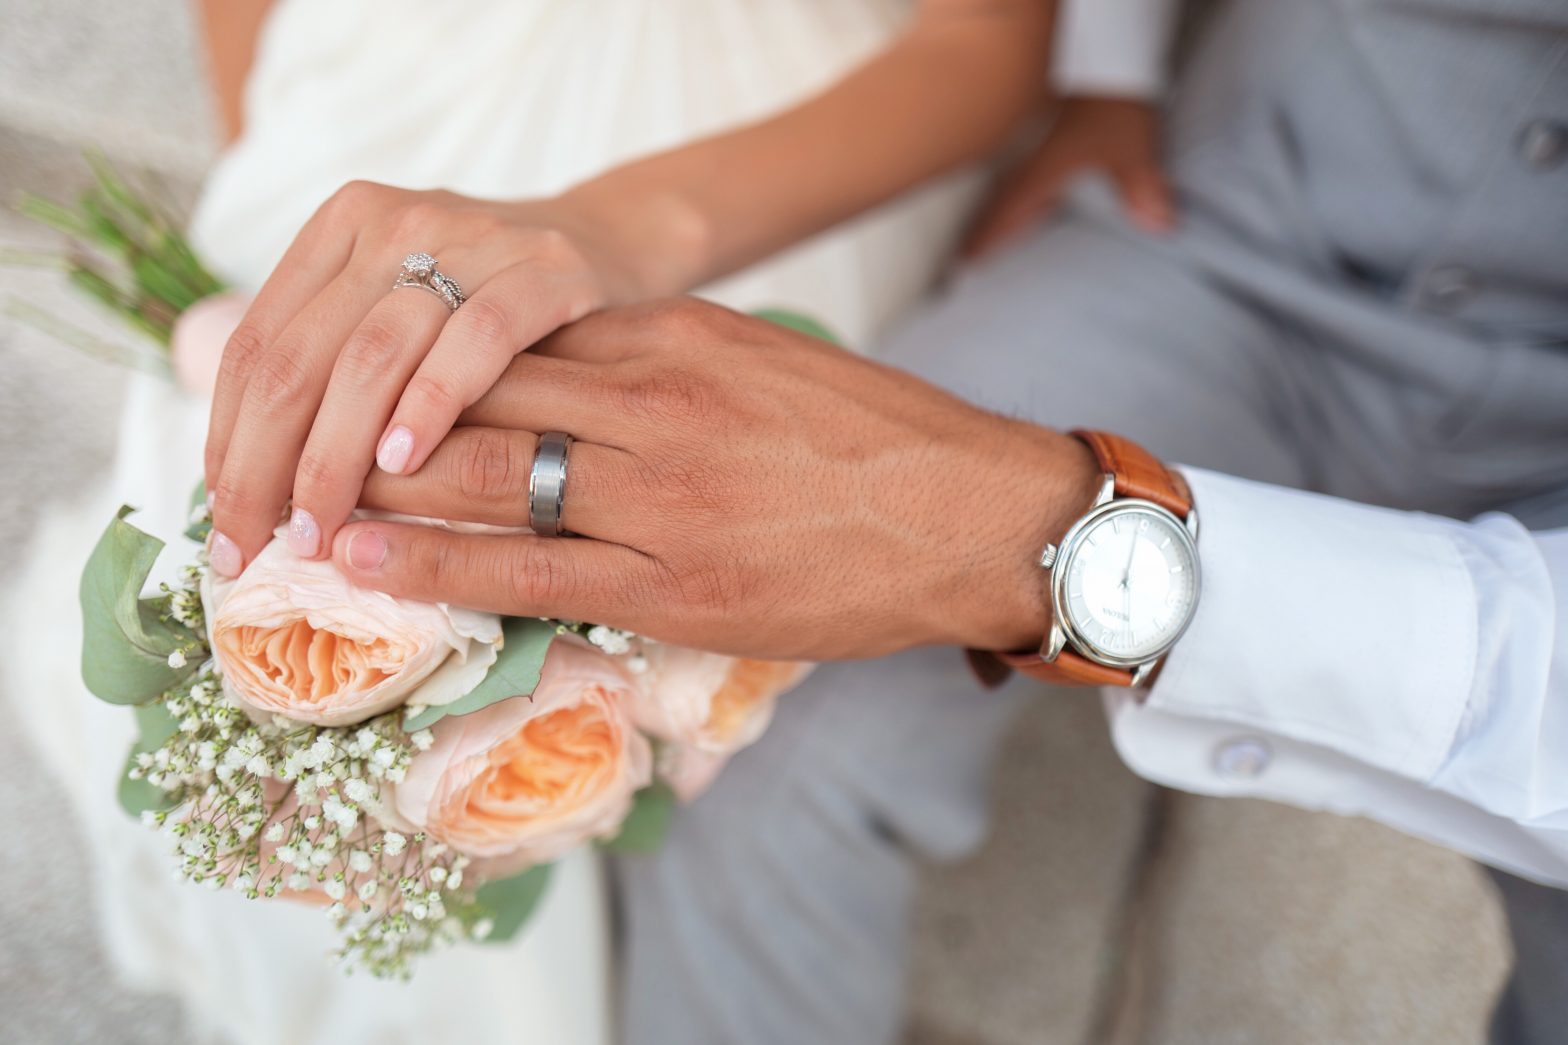 Hands of a man and a woman wearing wedding rings resting on a bouquet